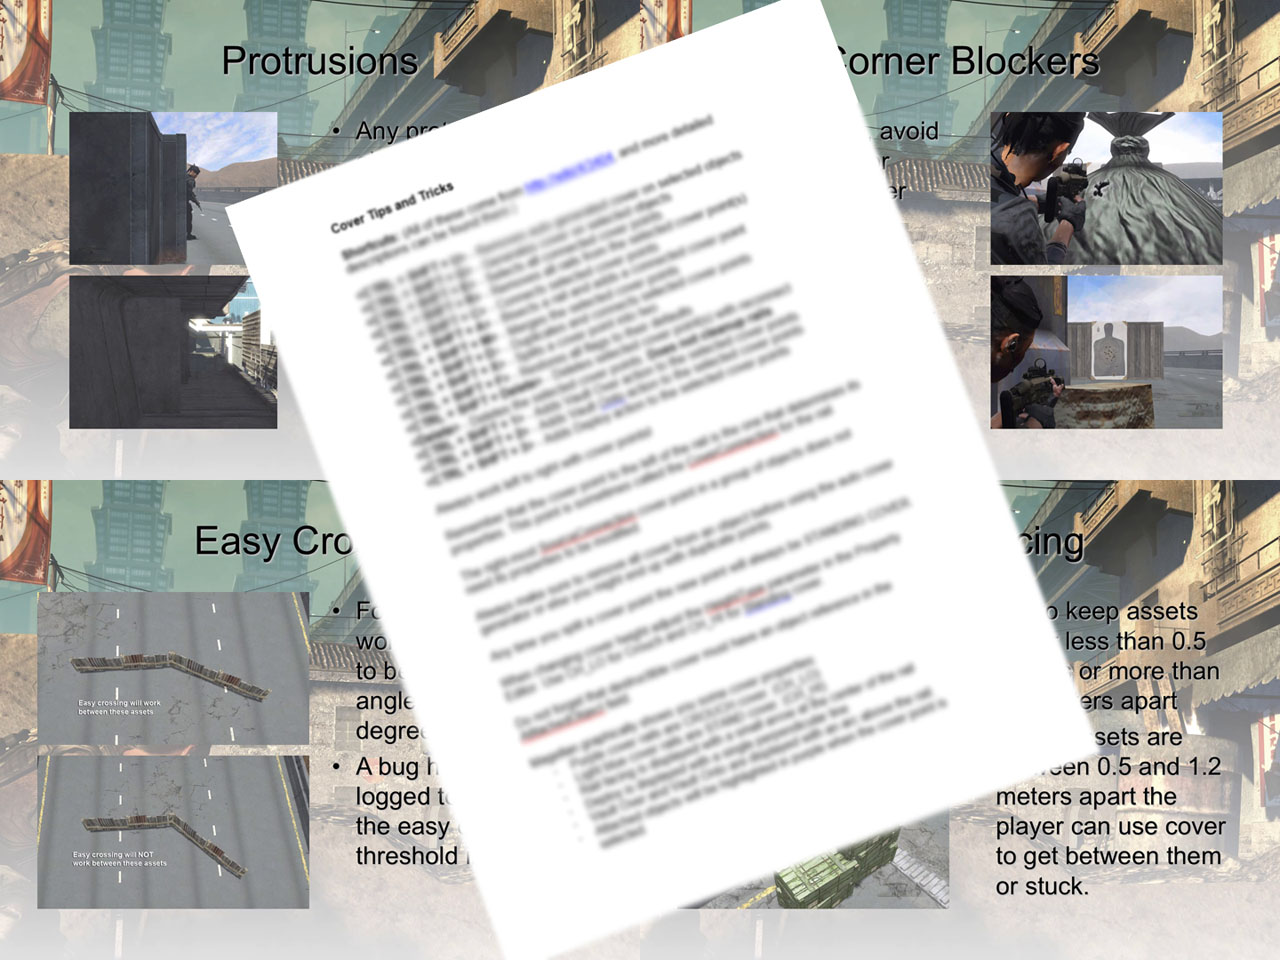 Here are just a few samples from the documents I created for the cover class.
 The tips and tricks handout has been blurred to protect its secrets.